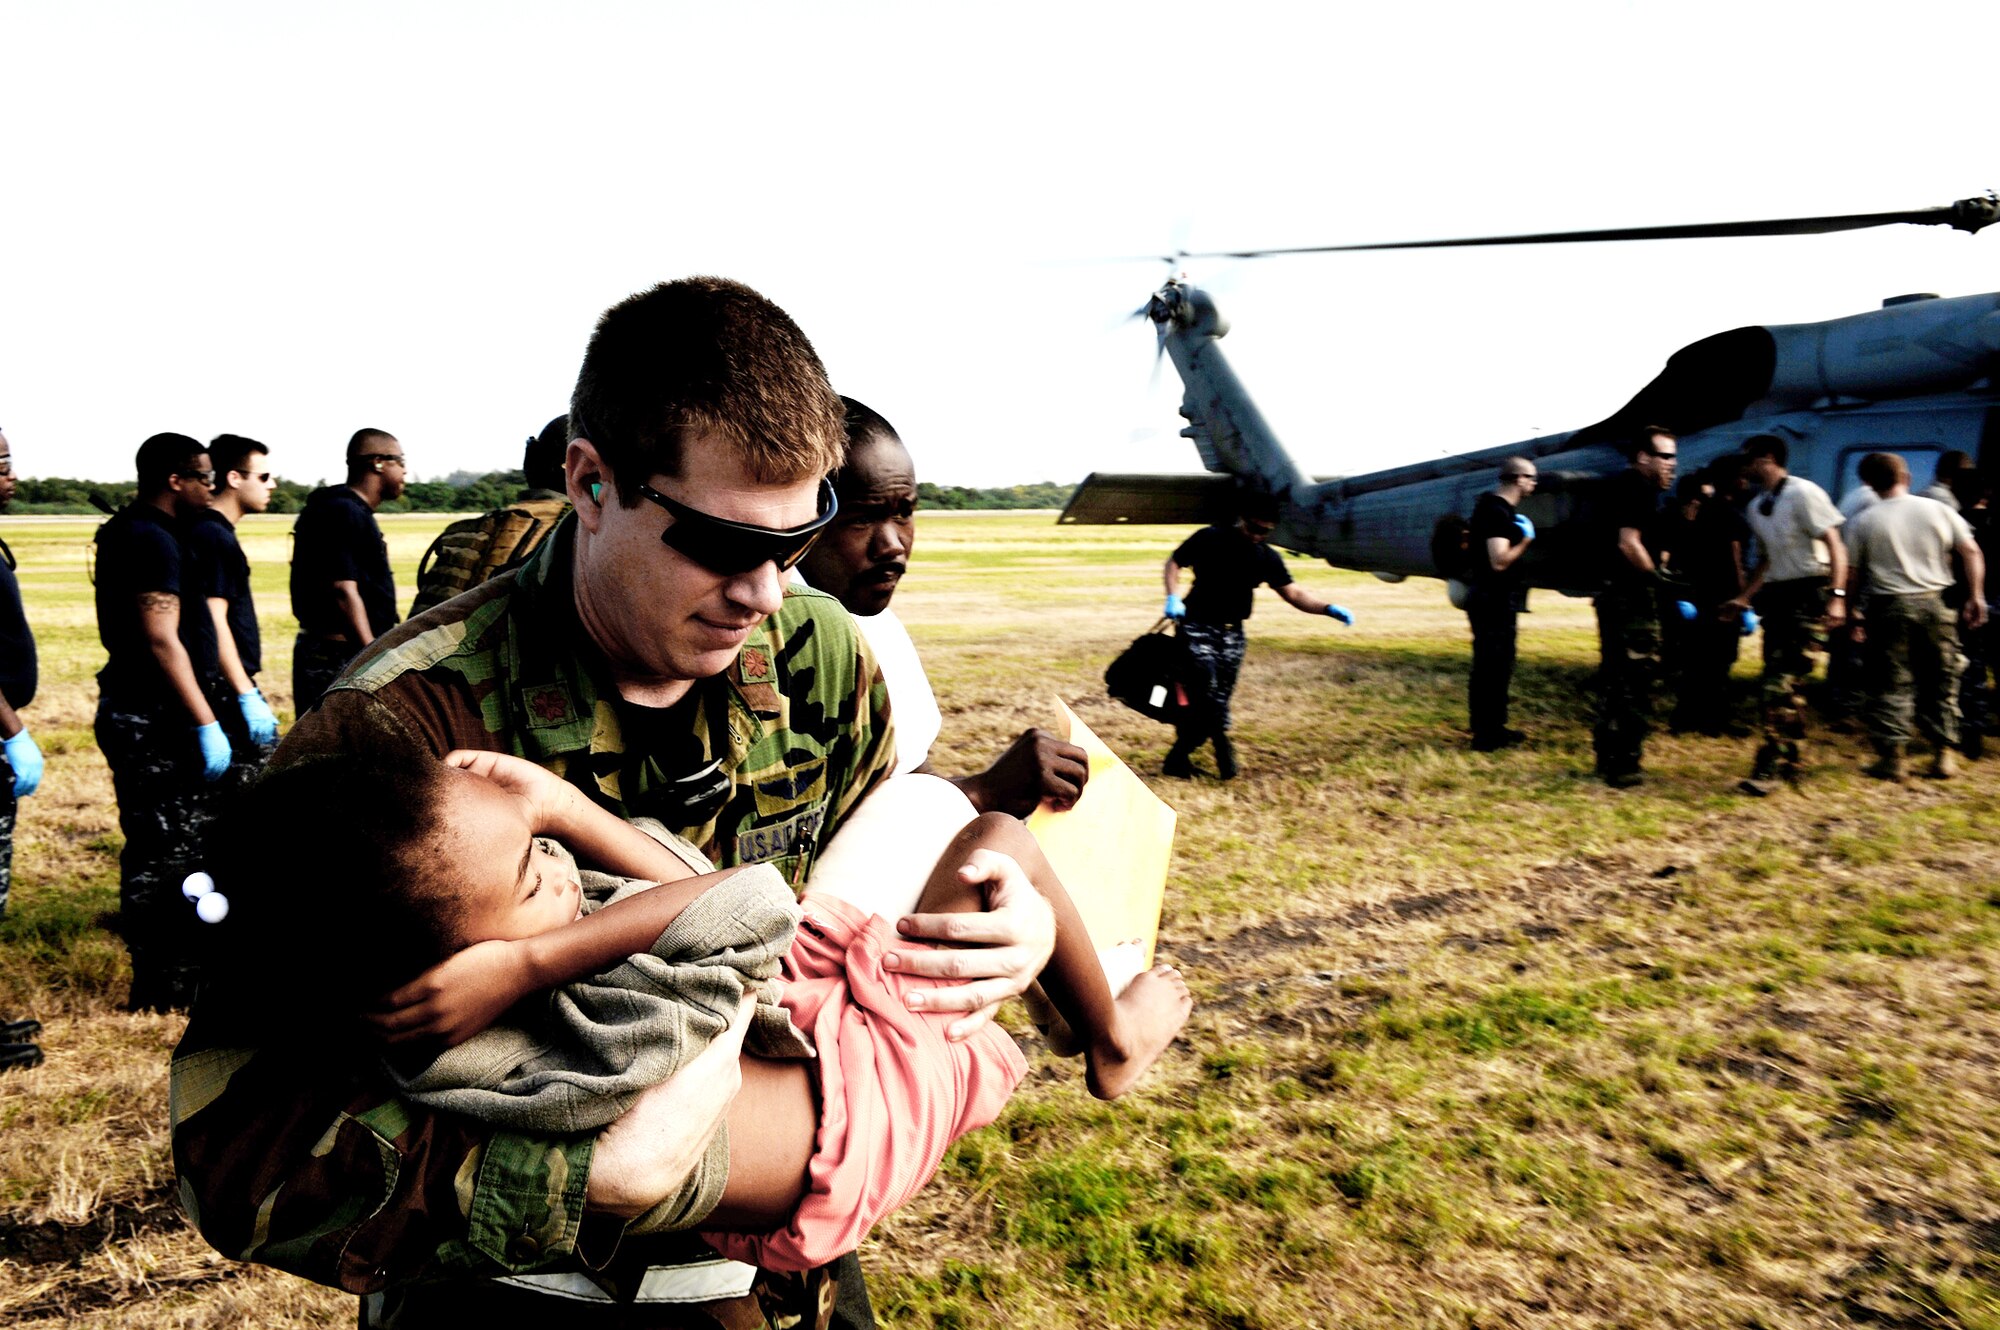 Maj. Timothy Ballard carries a 6-year-old boy from a helicopter to a field clinic Jan 19, 2010, at the Toussaint L'Ouverture International Airport in Port-au-Prince, Haiti. Later, the boy was airlifted to a stateside hospital in southern Florida. Major Ballard is with the 1st Special Operations Support Squadron at Hurlburt Field, Fla. (U.S. Air Force photo/Tech. Sgt. James L. Harper Jr.)